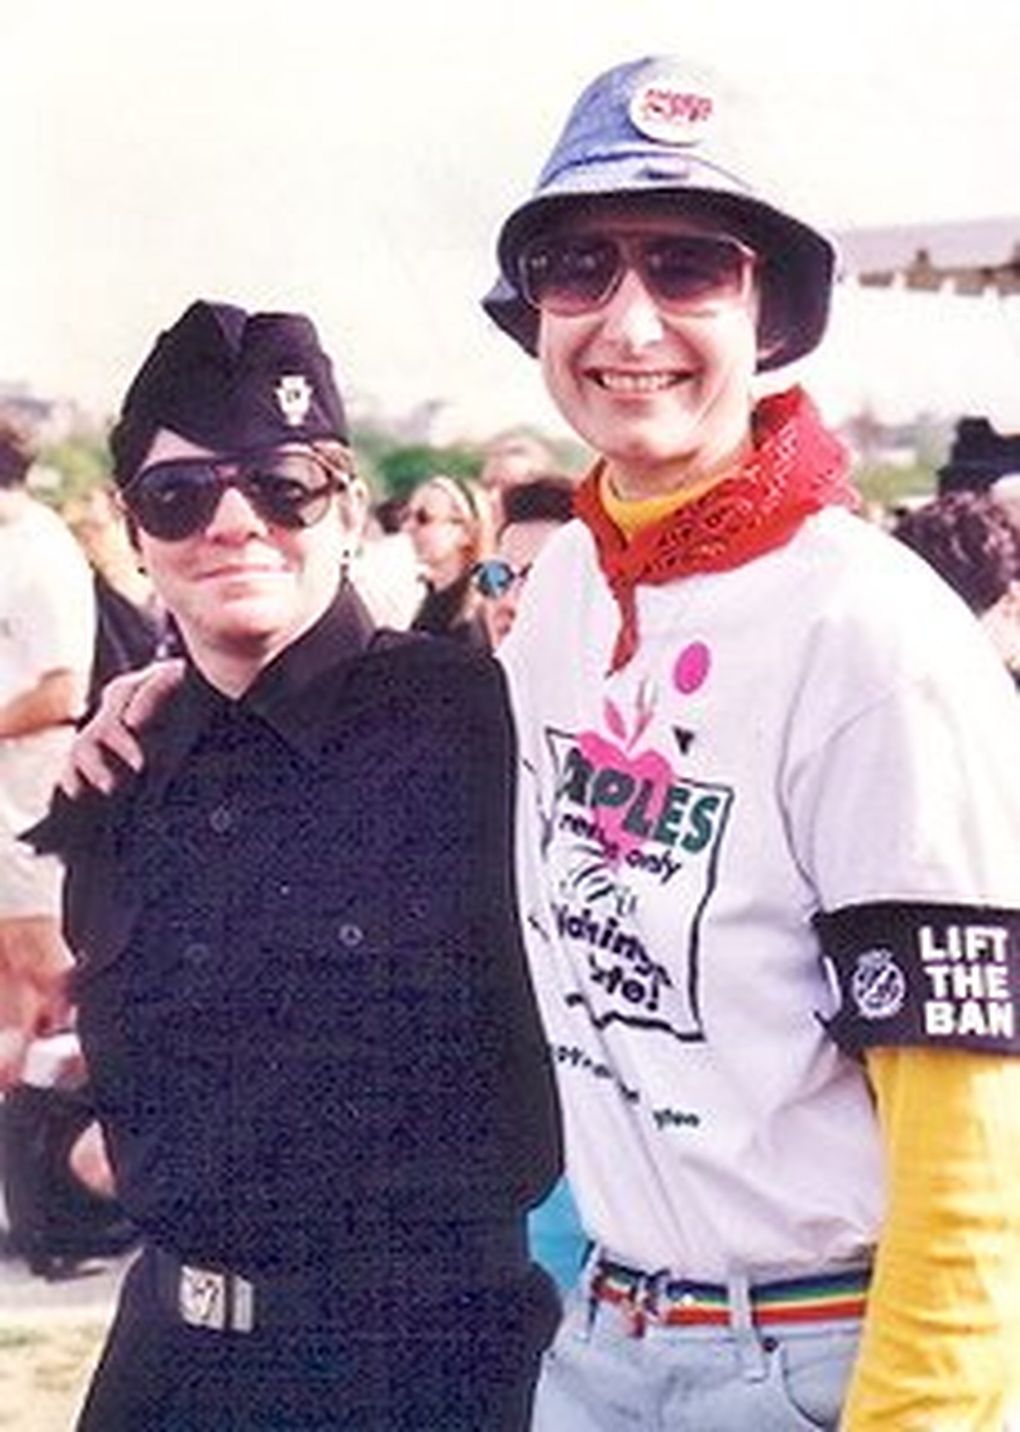 Rita Smith, right, with Kate Farrell at the 1993 March on Washington for Lesbian, Gay, and Bi Equal Rights and Liberation. (Courtesy of Rita Smith)